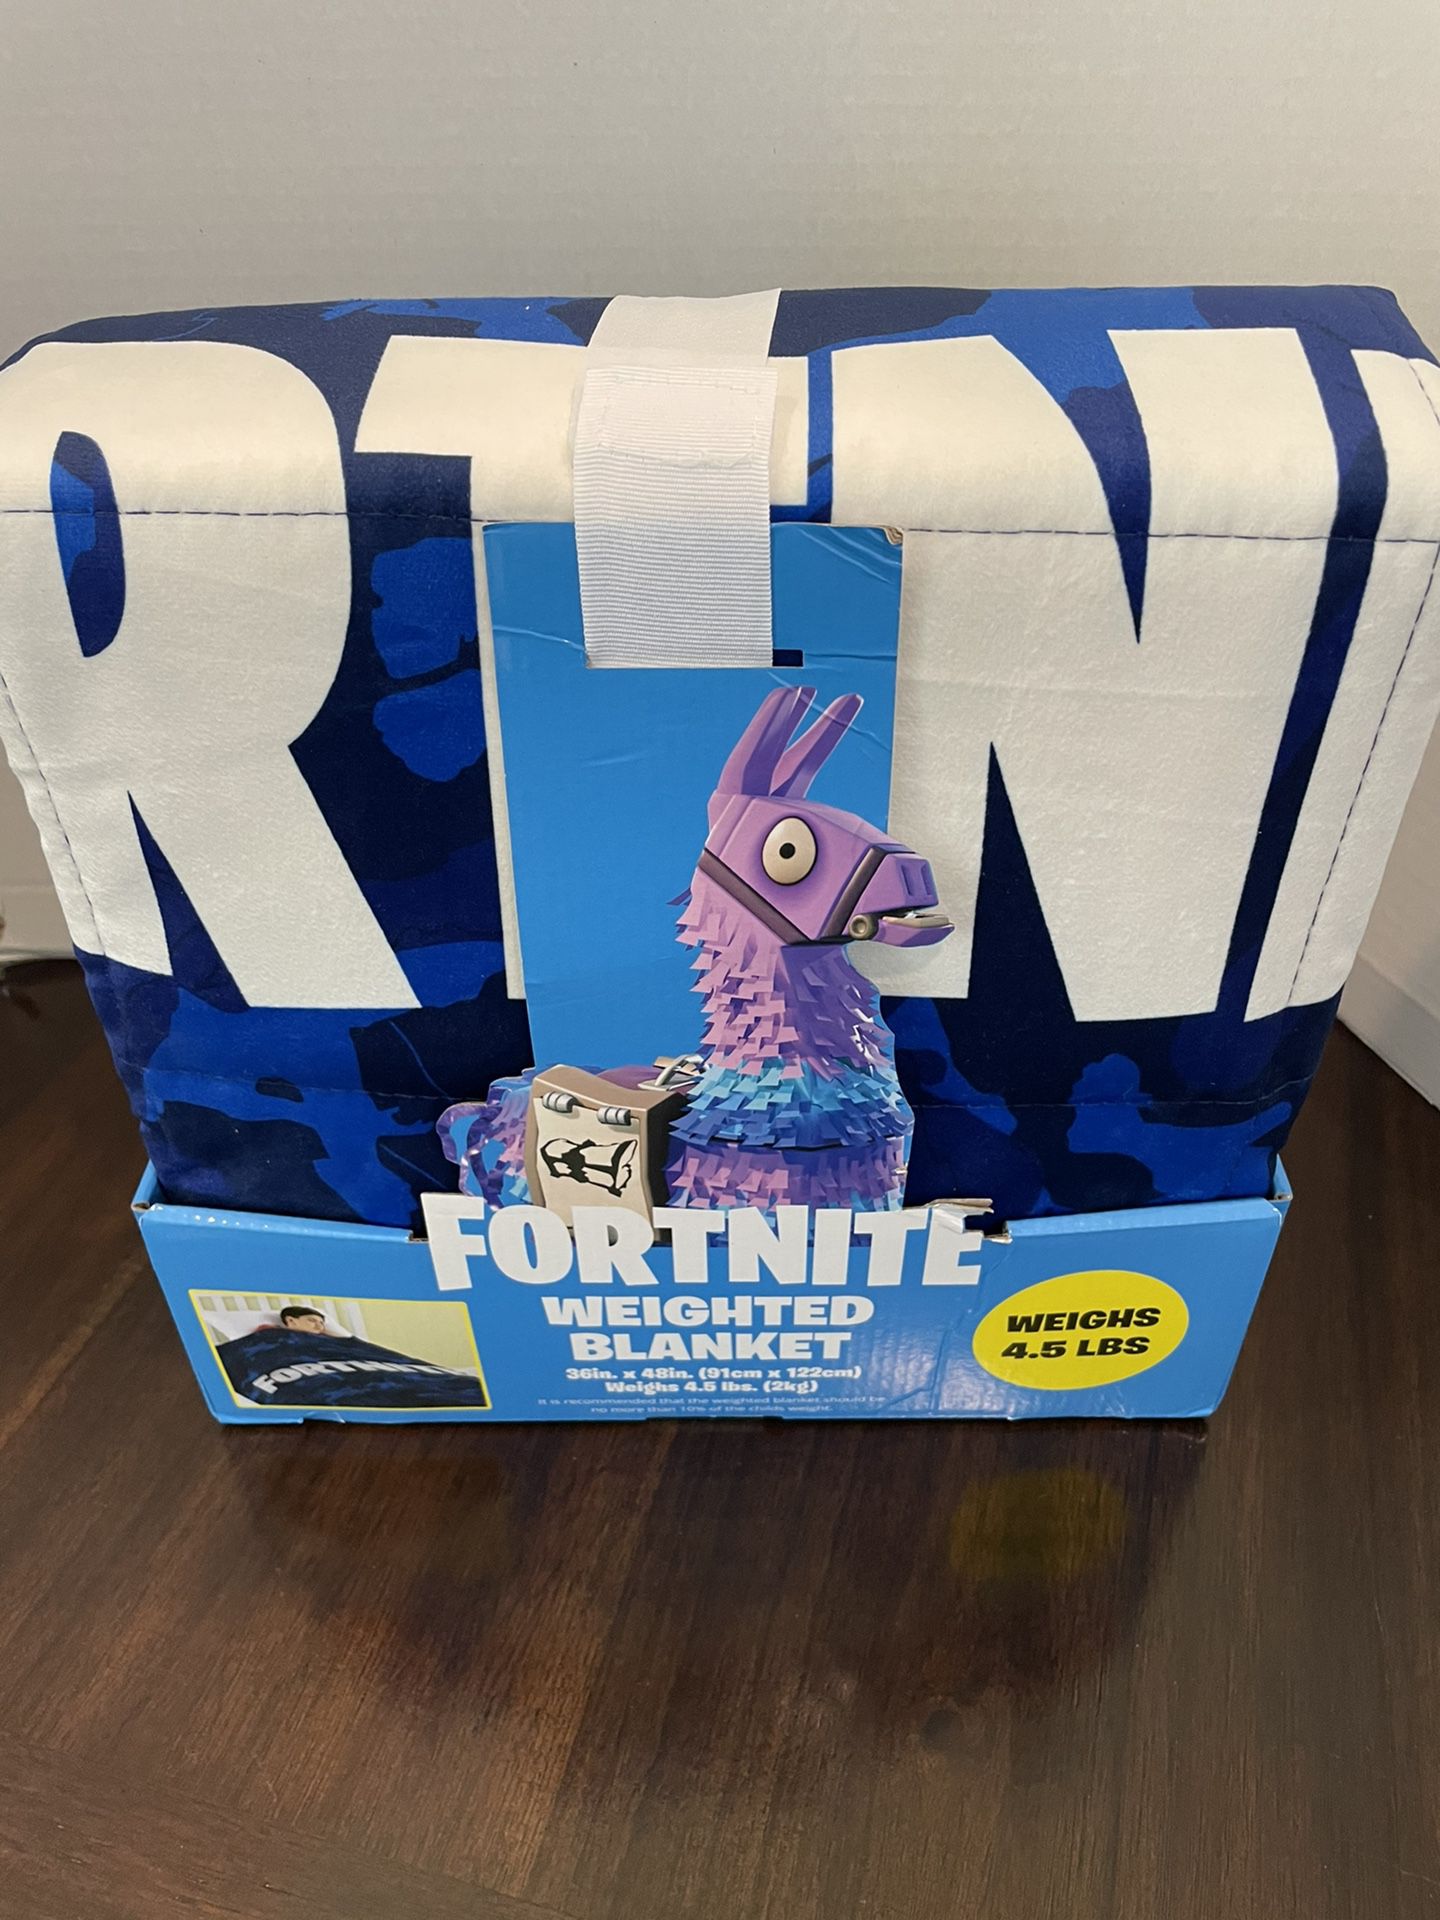 Fortnite weighted Blanket 4.5 pounds Kids Blanket Brand new 36”x48” 